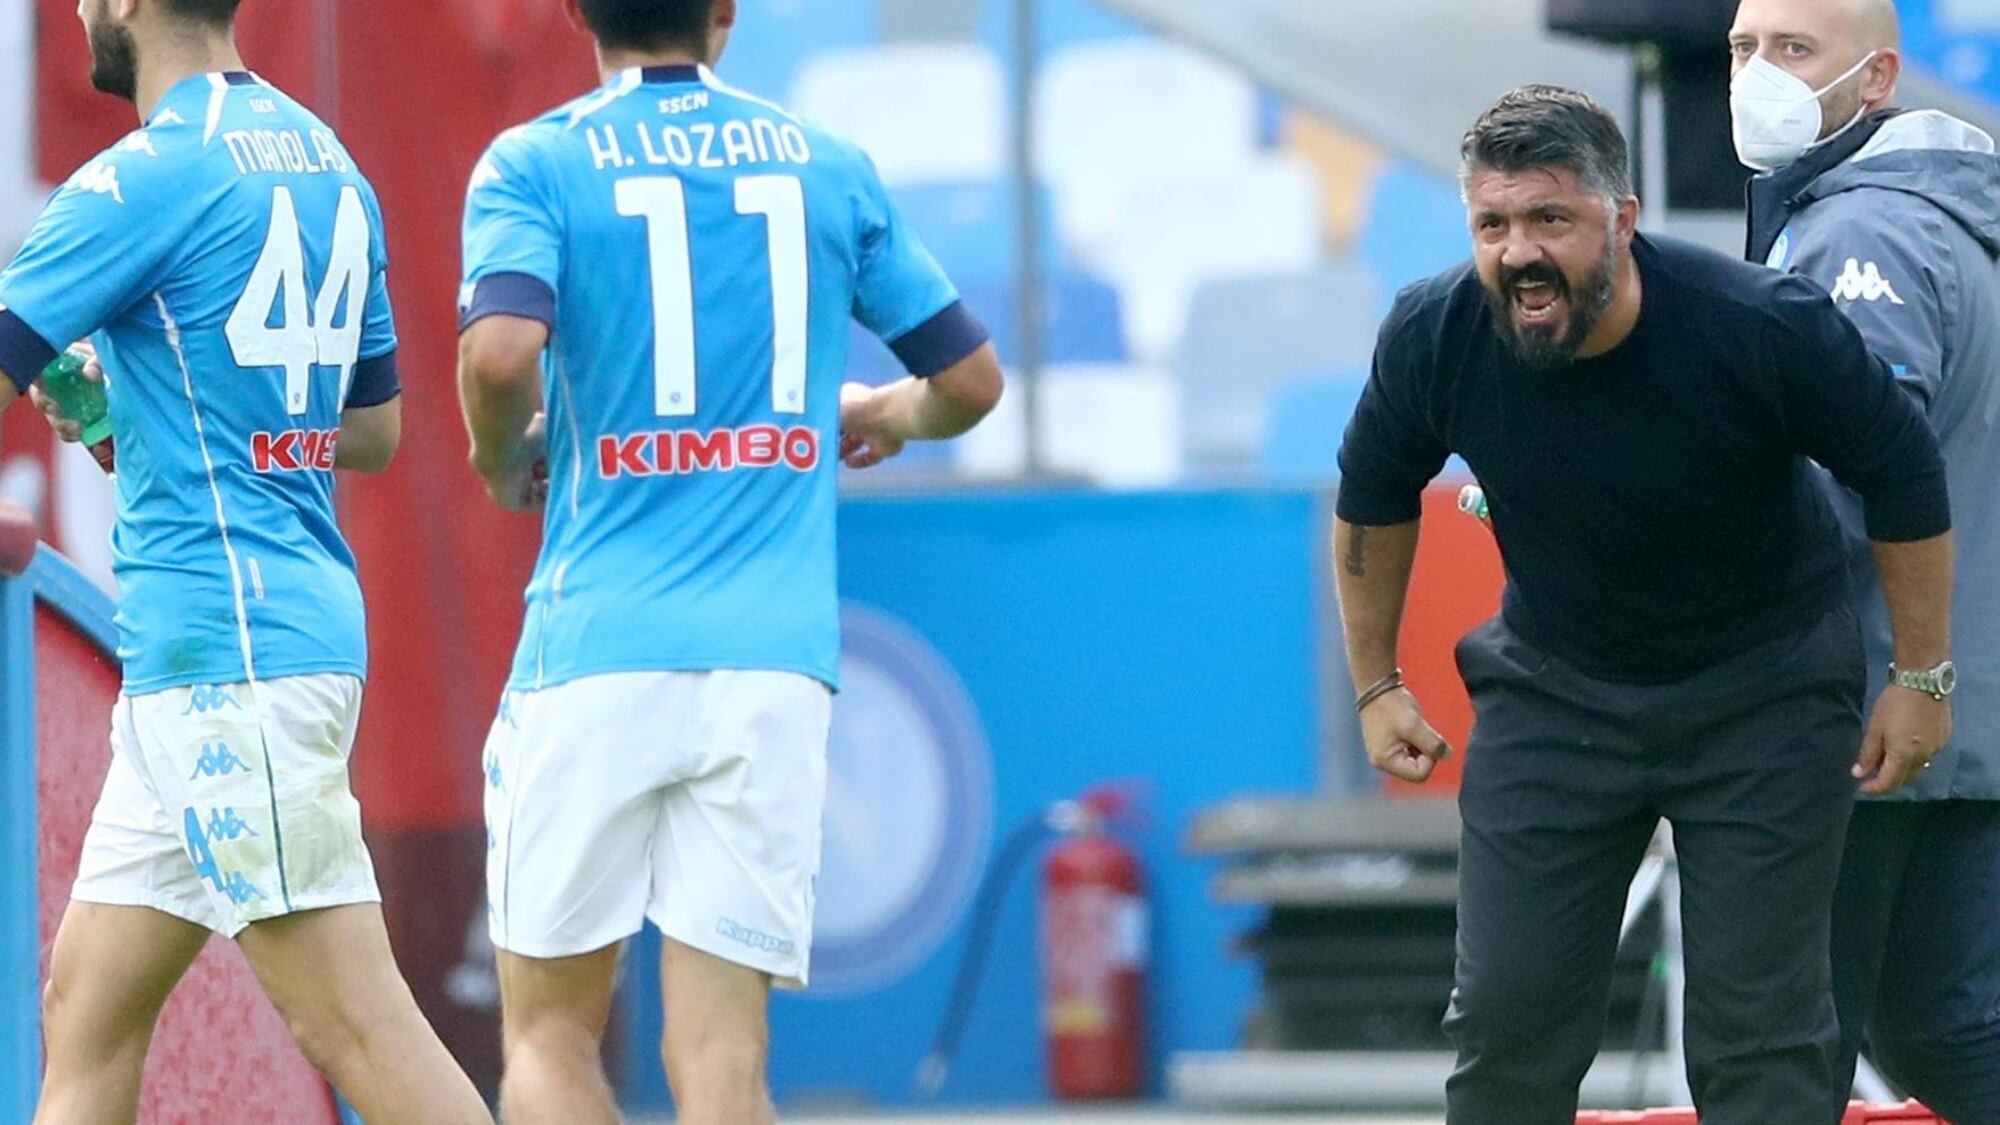 Not only on the court: The insults that Gennaro Gattuso launched against Hirving Lozano